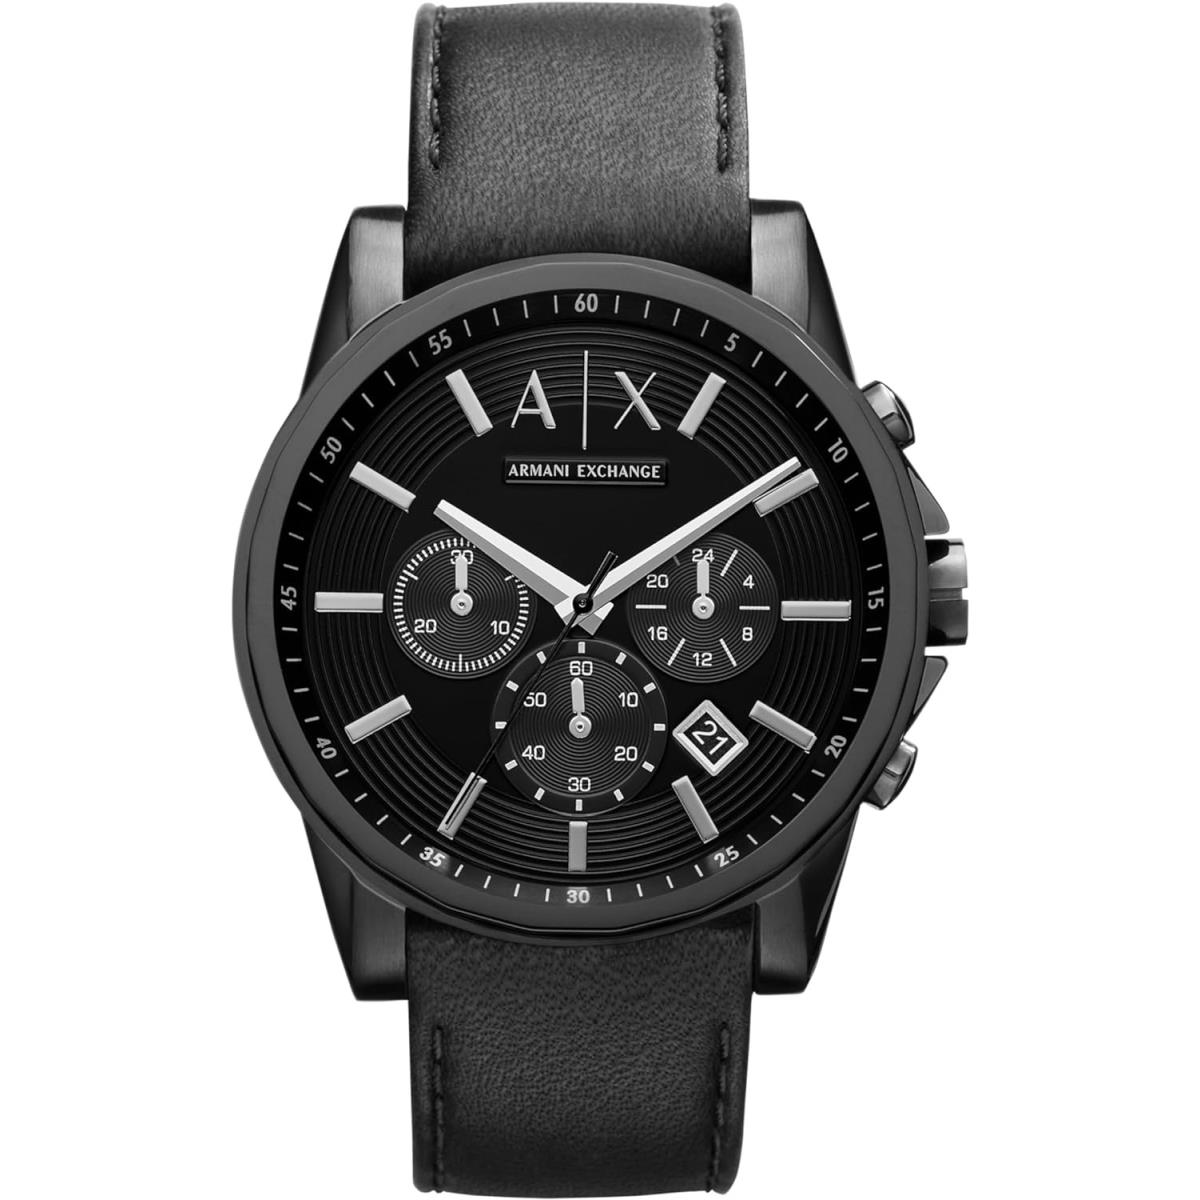 Armani Exchange Men`s Chronograph Watch with Band Options Black/Black Leather